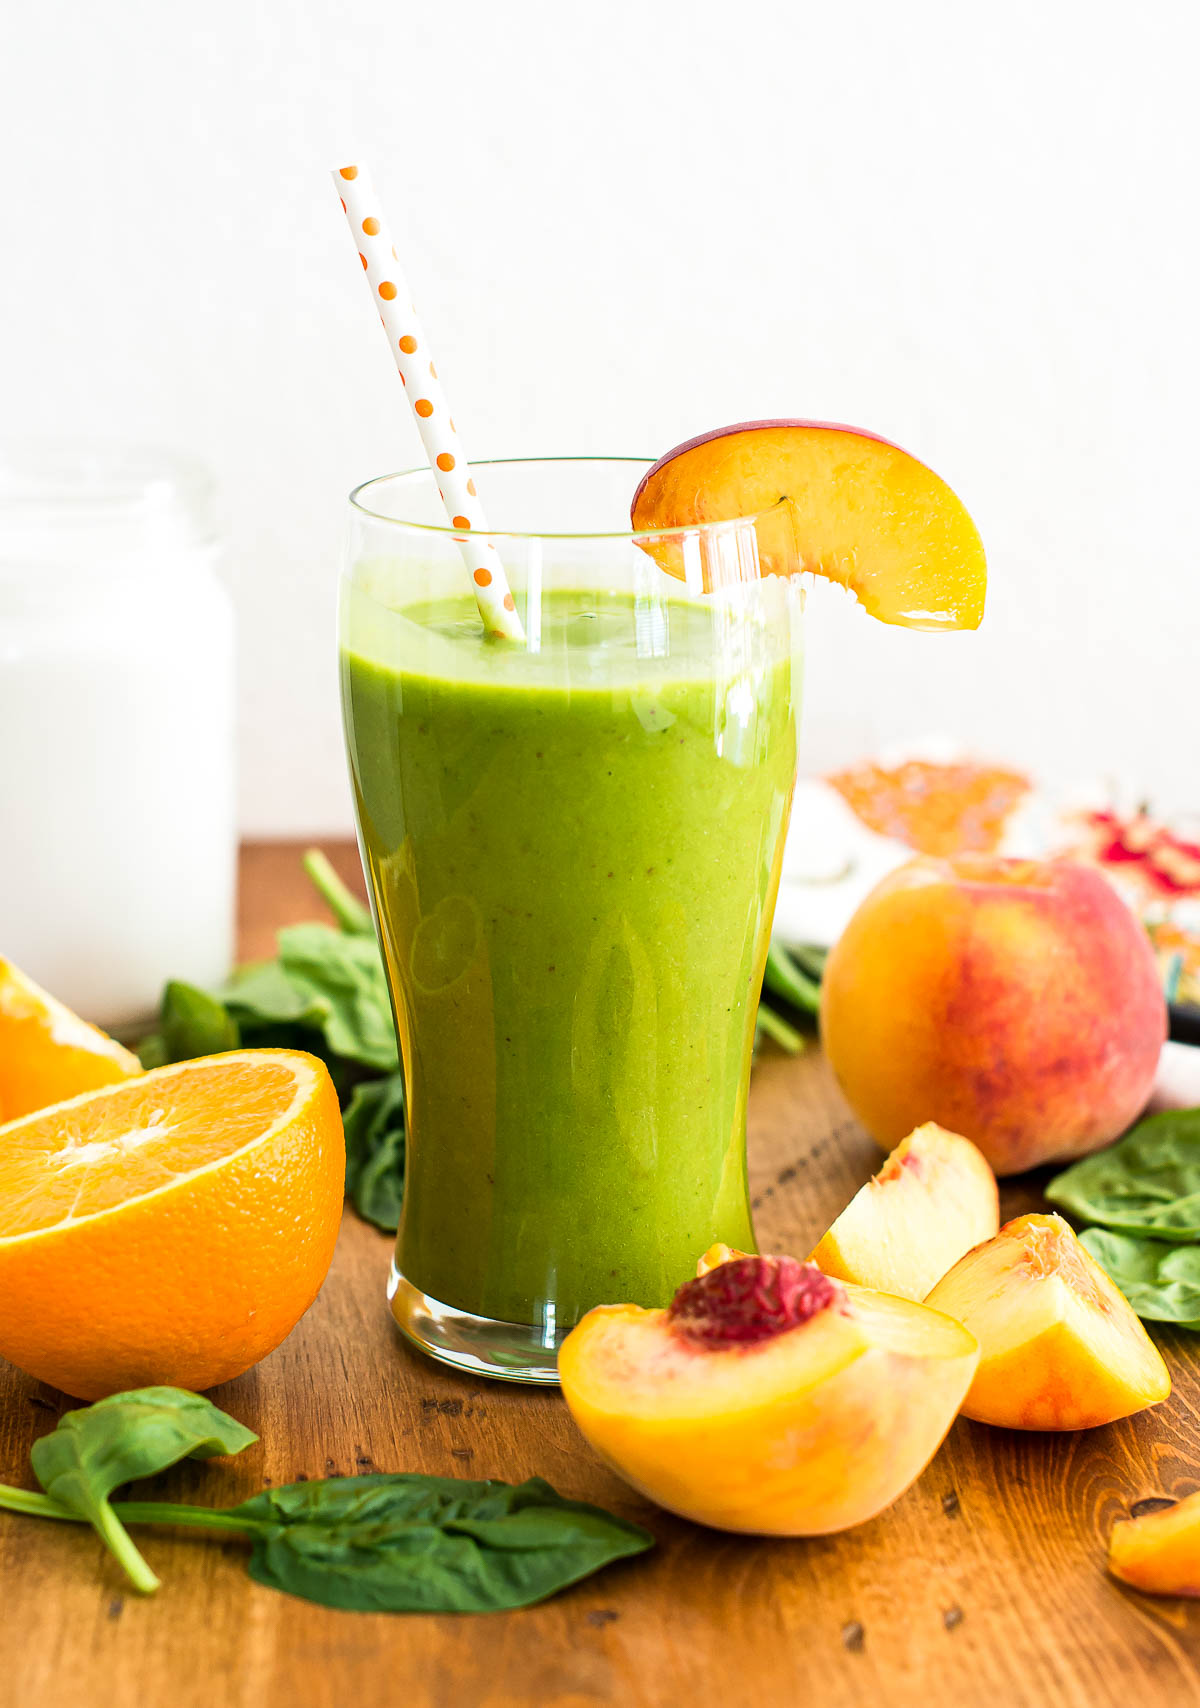 creamy green smoothie in glass with polka dot paper straw and a peach slice.